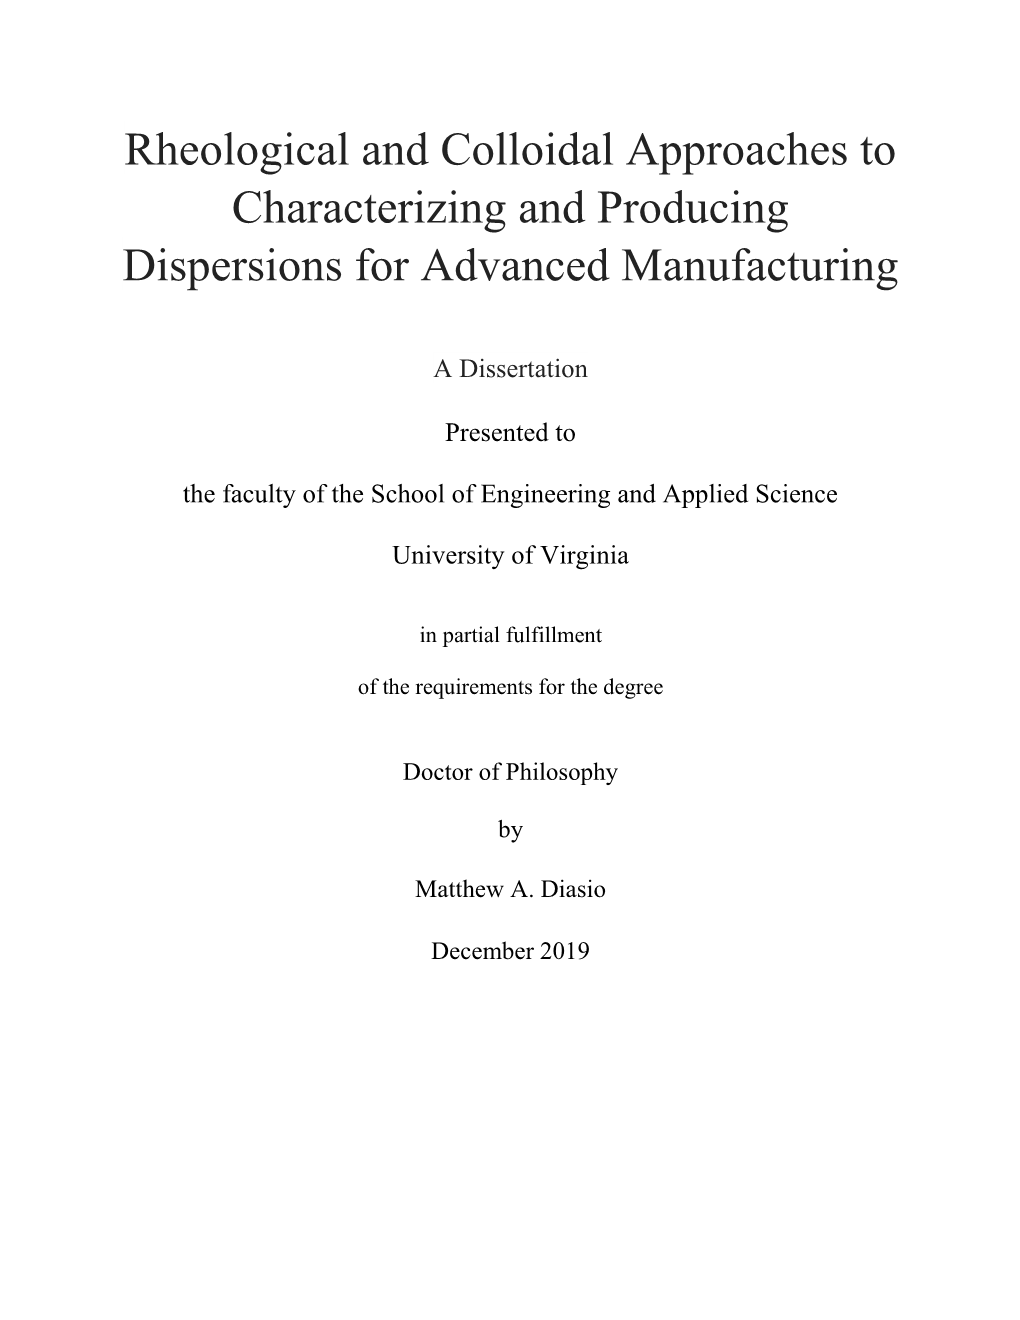 Rheological and Colloidal Approaches to Characterizing and Producing Dispersions for Advanced Manufacturing